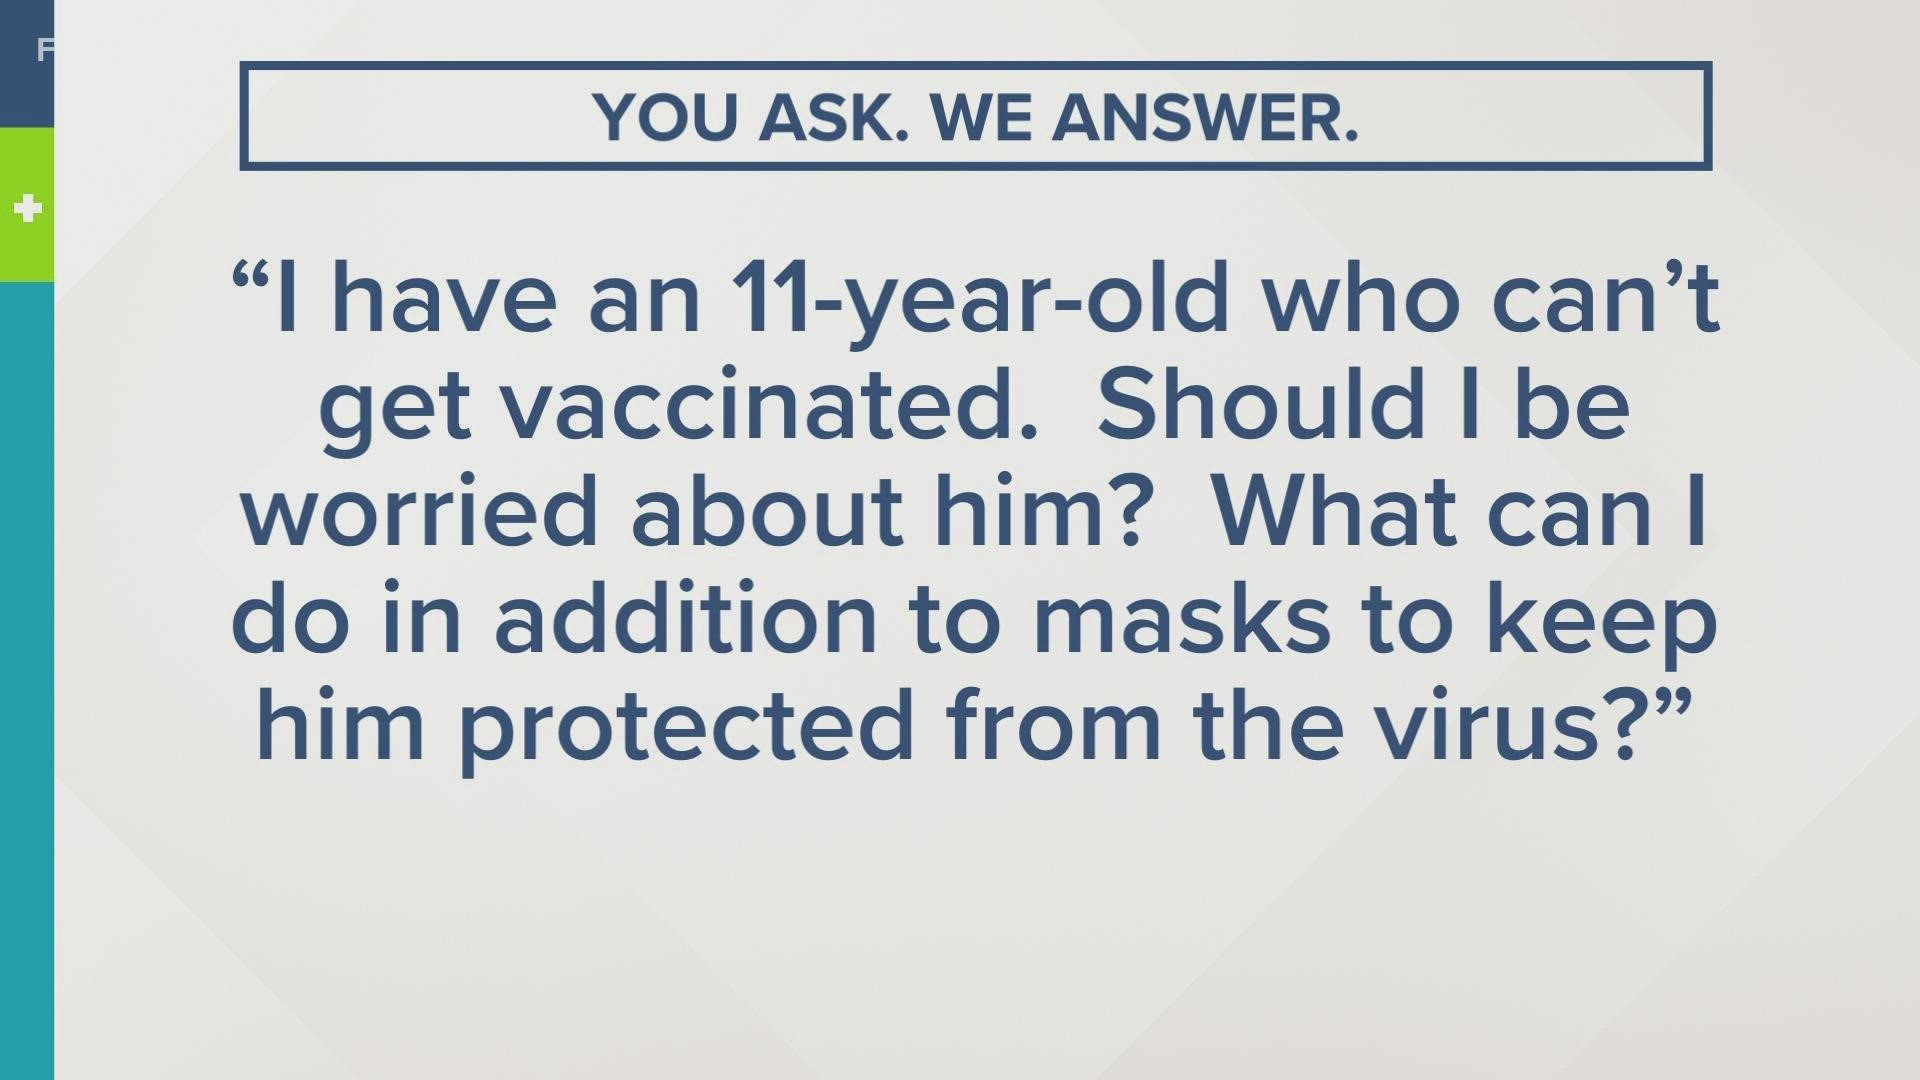 If you have a question about COVID-19 or the vaccine, email SHARE61@fox61.com or send a text to 860-527-6161.